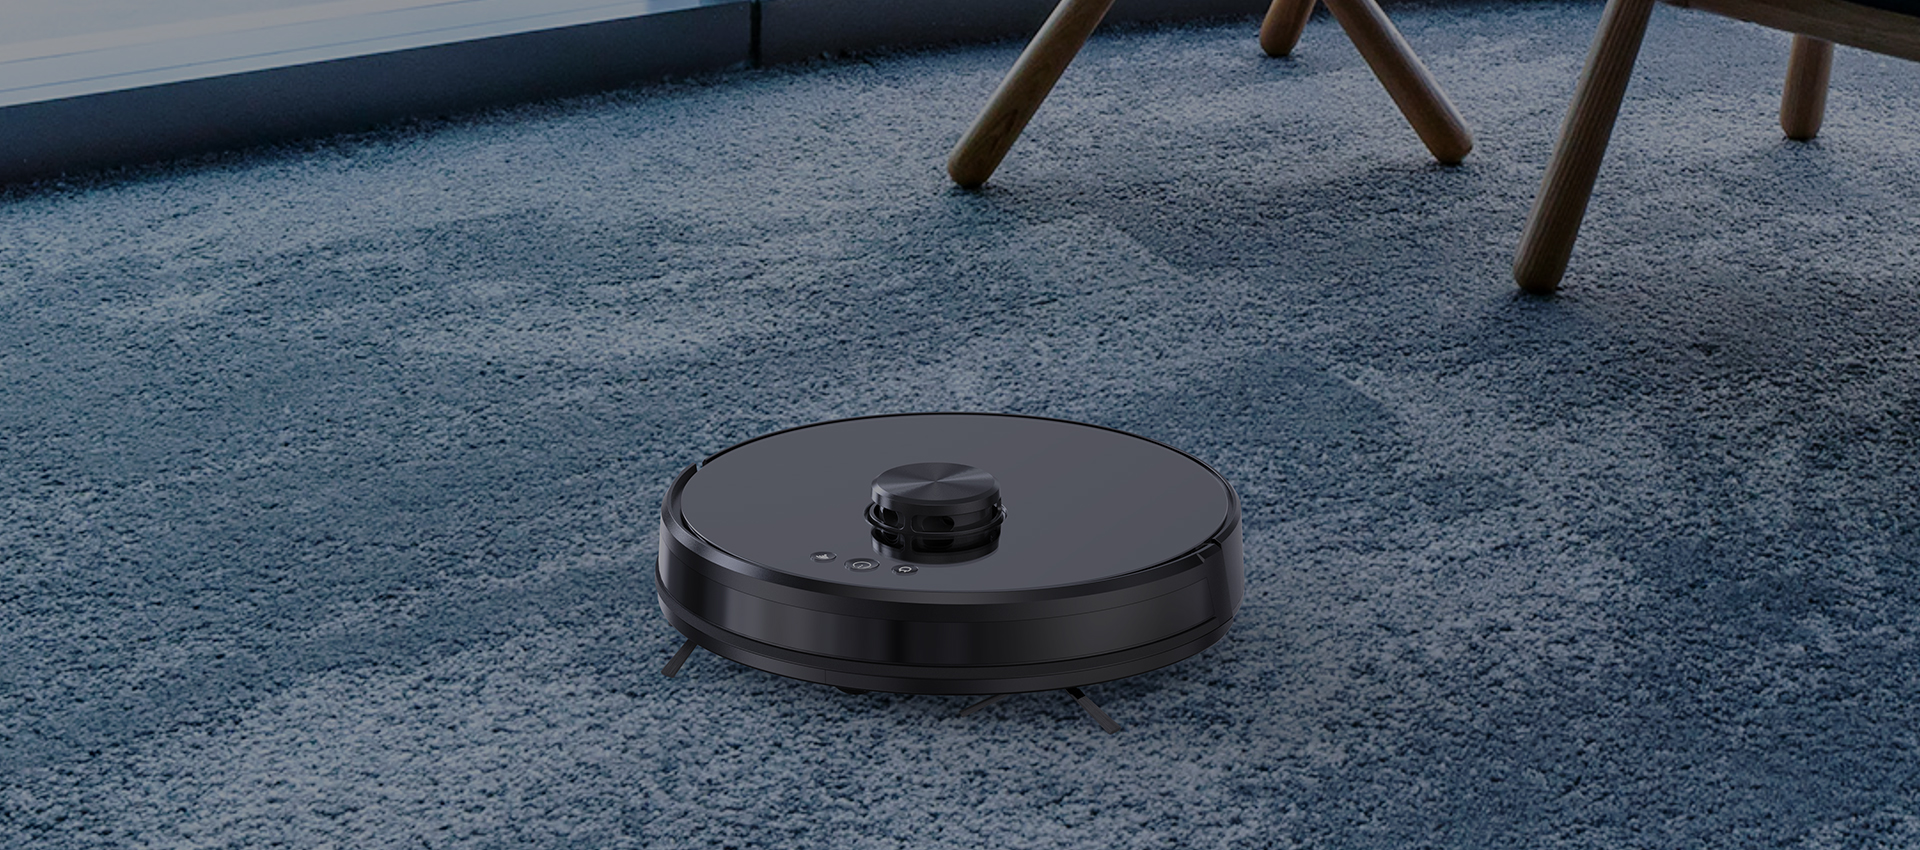 Smart Robot Automatic Vacuum Cleaner for Carpet and Hardwood